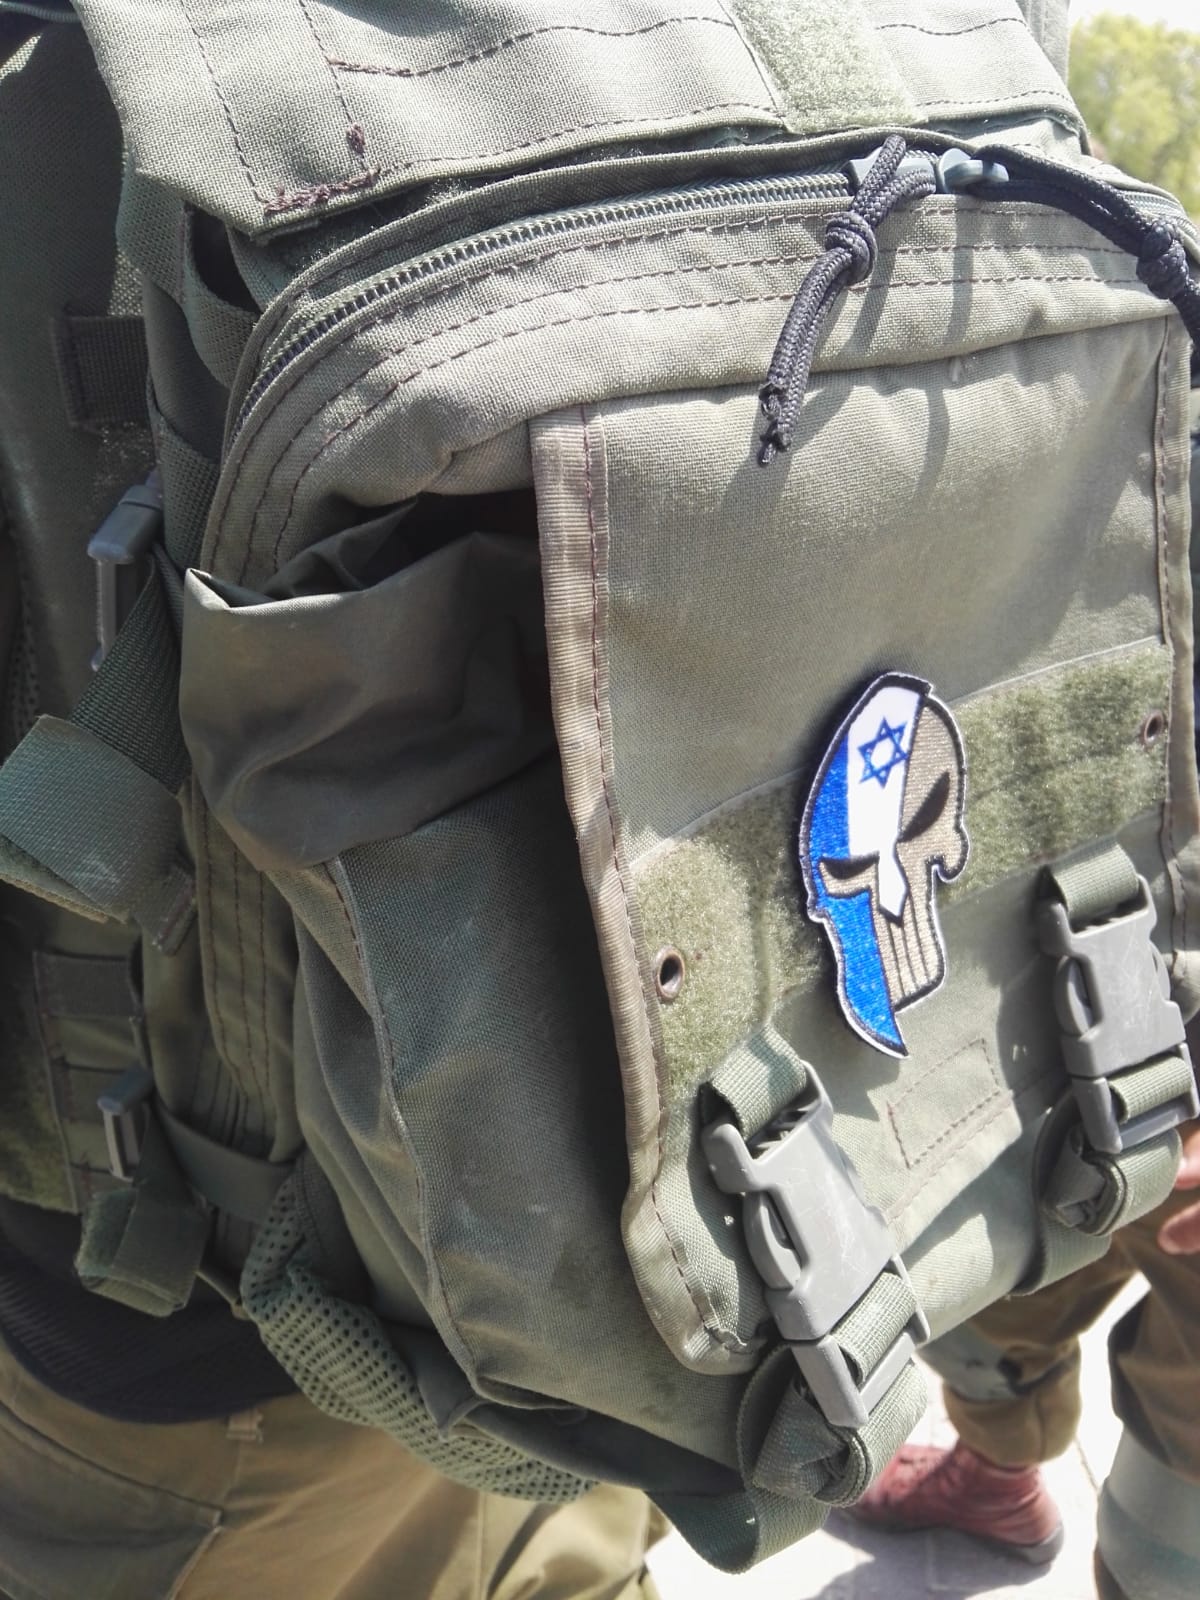 An Israeli soldier carrying a backpack with the Punisher/Israeli Star of David insignia. (Uri Givati)